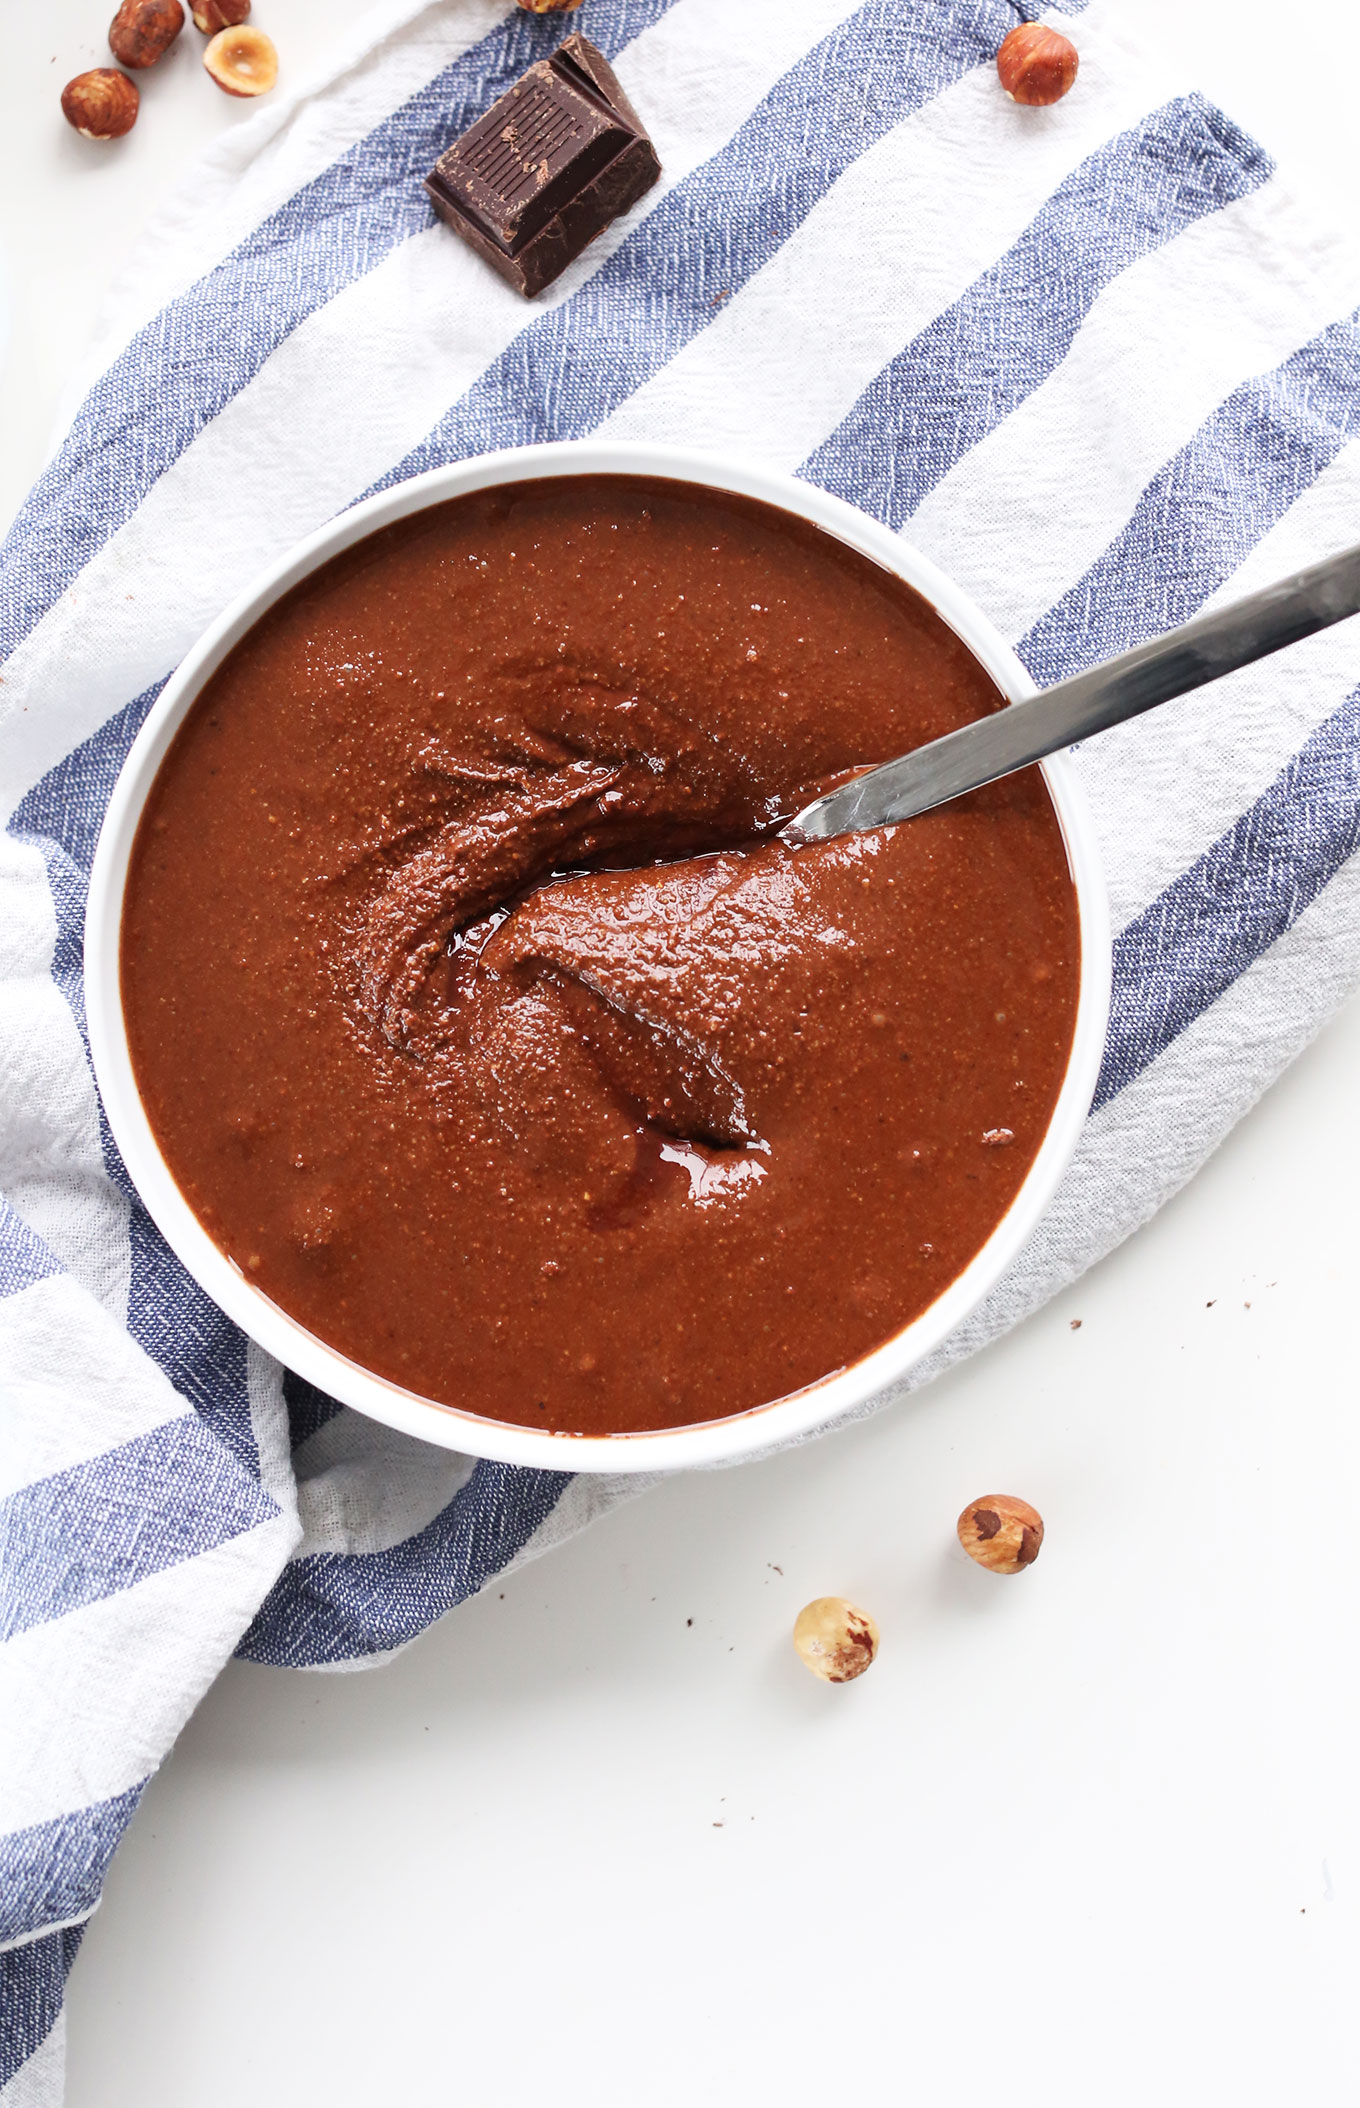 Bowl of our DIY vegan gluten-free Nutella made with simple ingredients